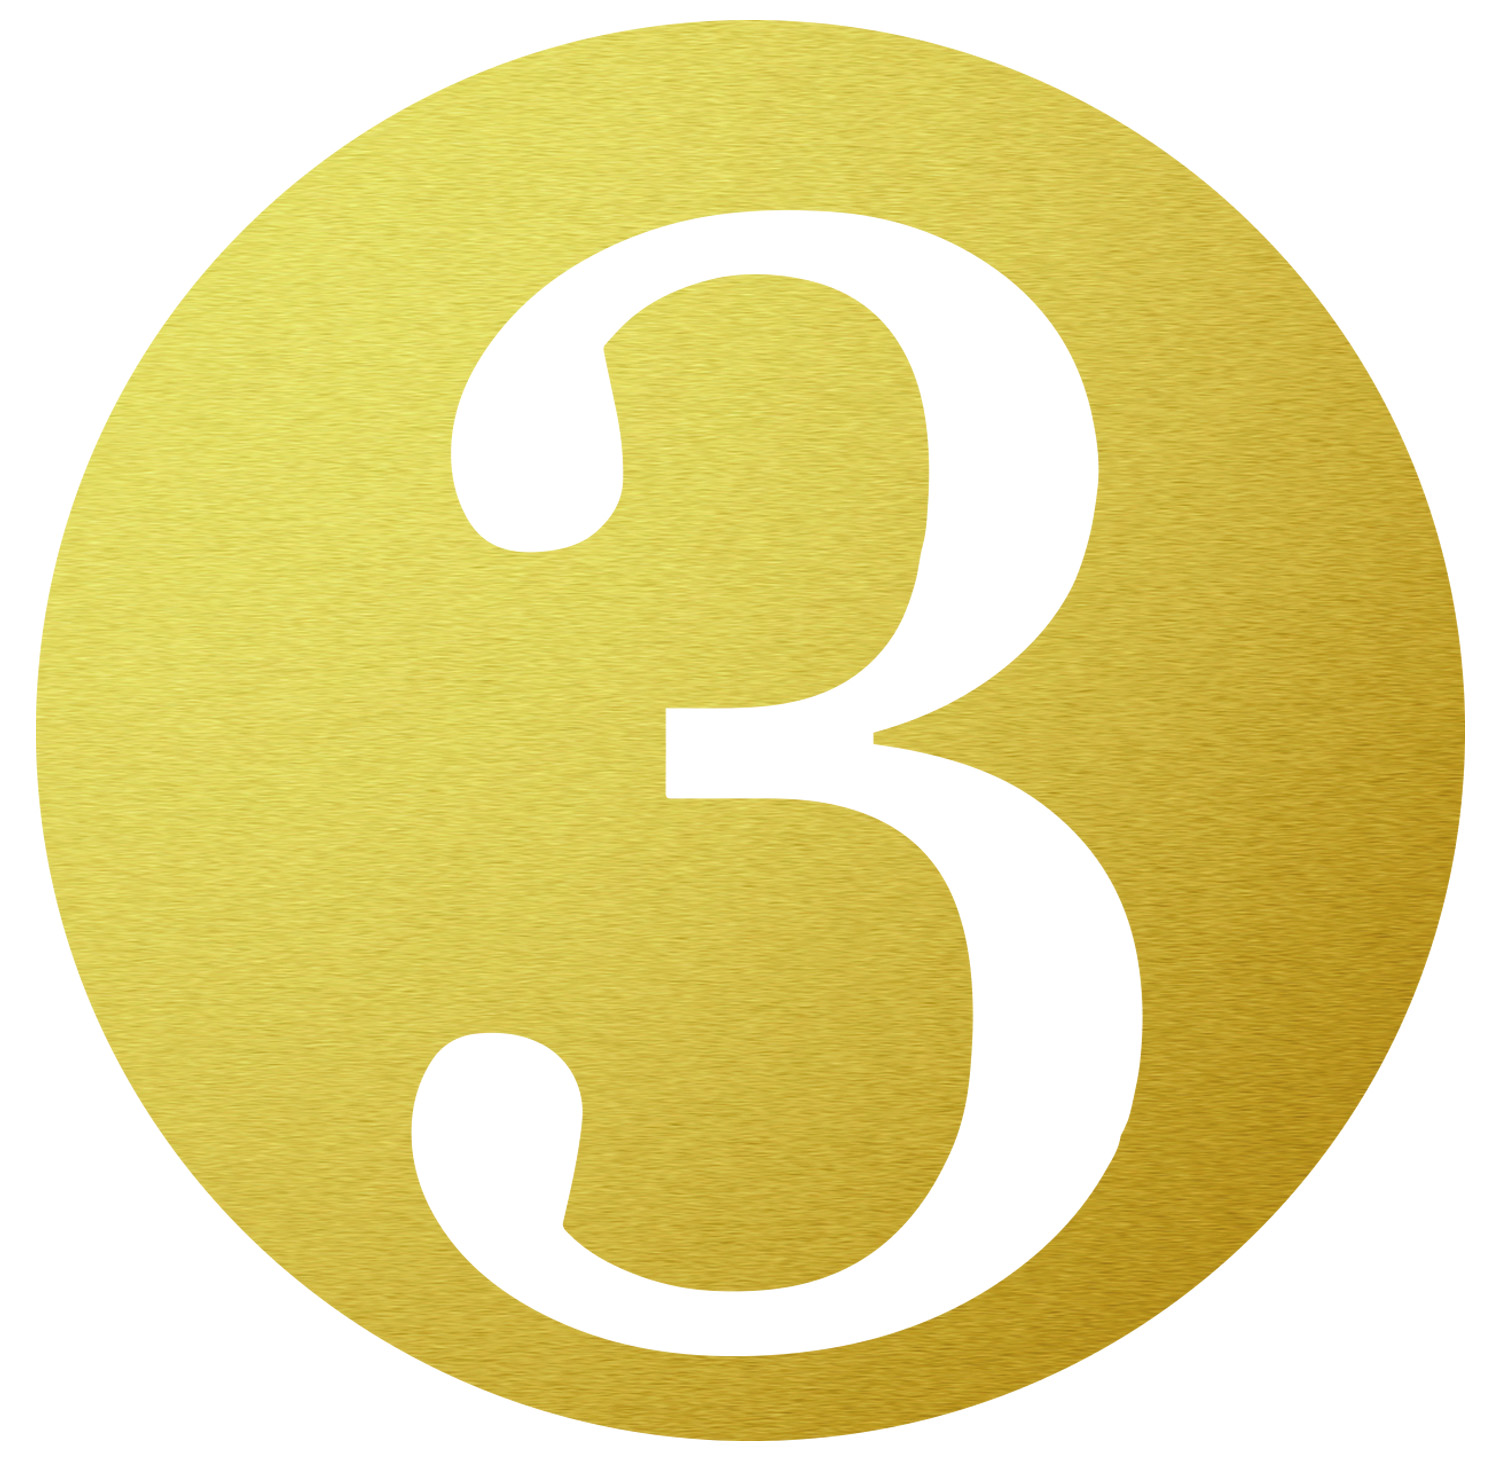 Numerology 3 Meaning, What Does the Number 3 Mean in Numerology